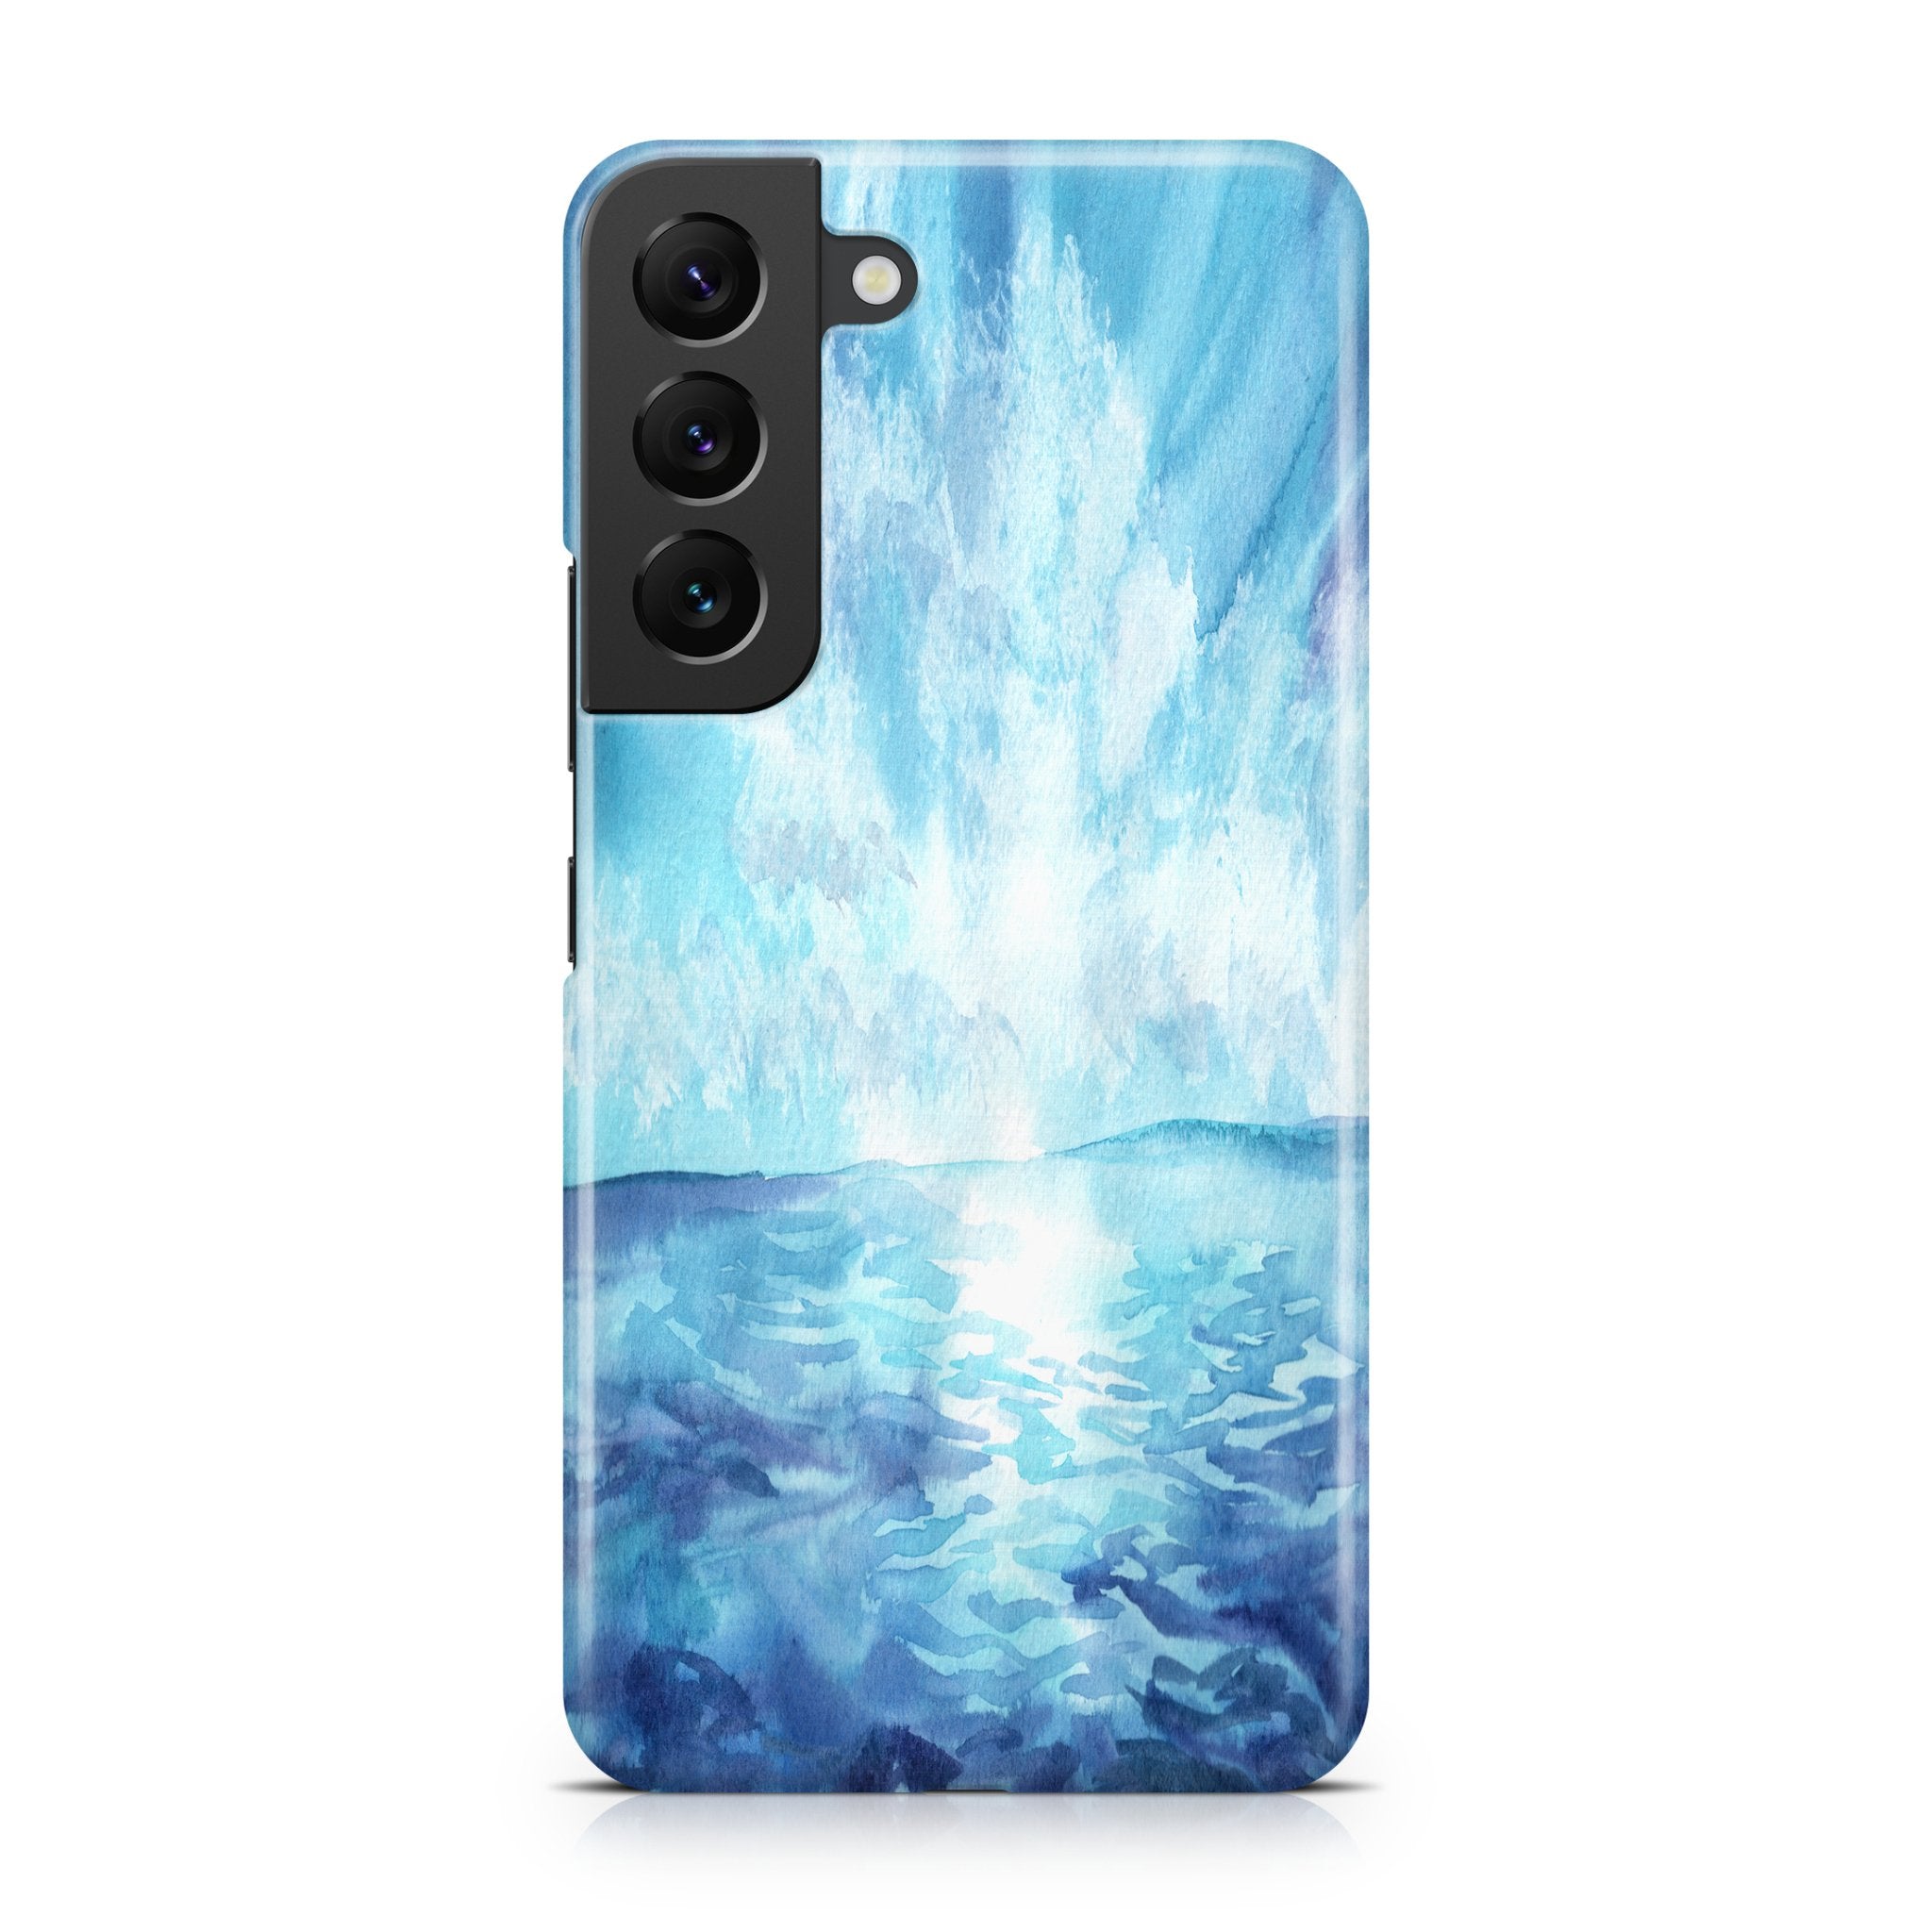 Blue Watercolor Sunrise - Samsung phone case designs by CaseSwagger